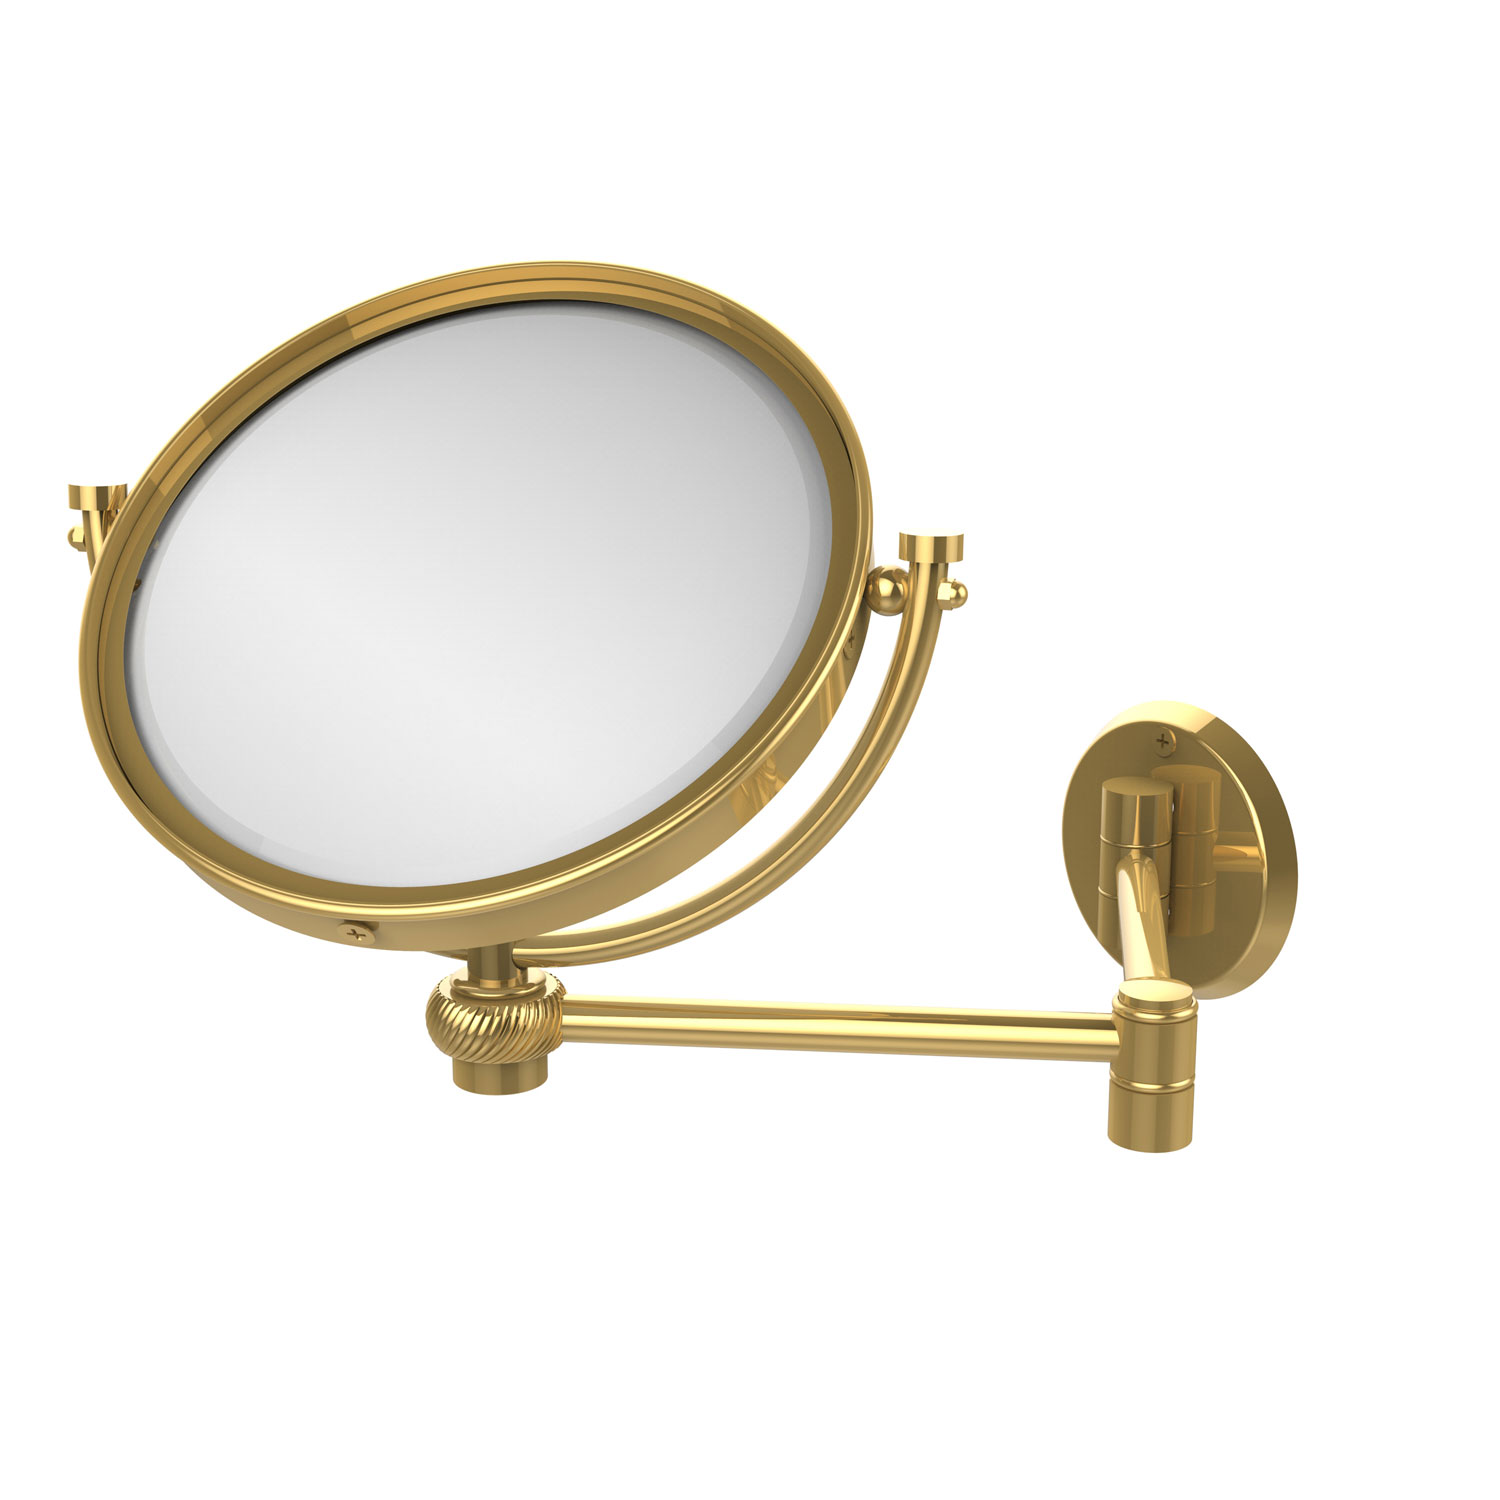 8 Inch Wall Mounted Extending Make-Up Mirror 4X Magnification With Twist Accent, Polished Brass